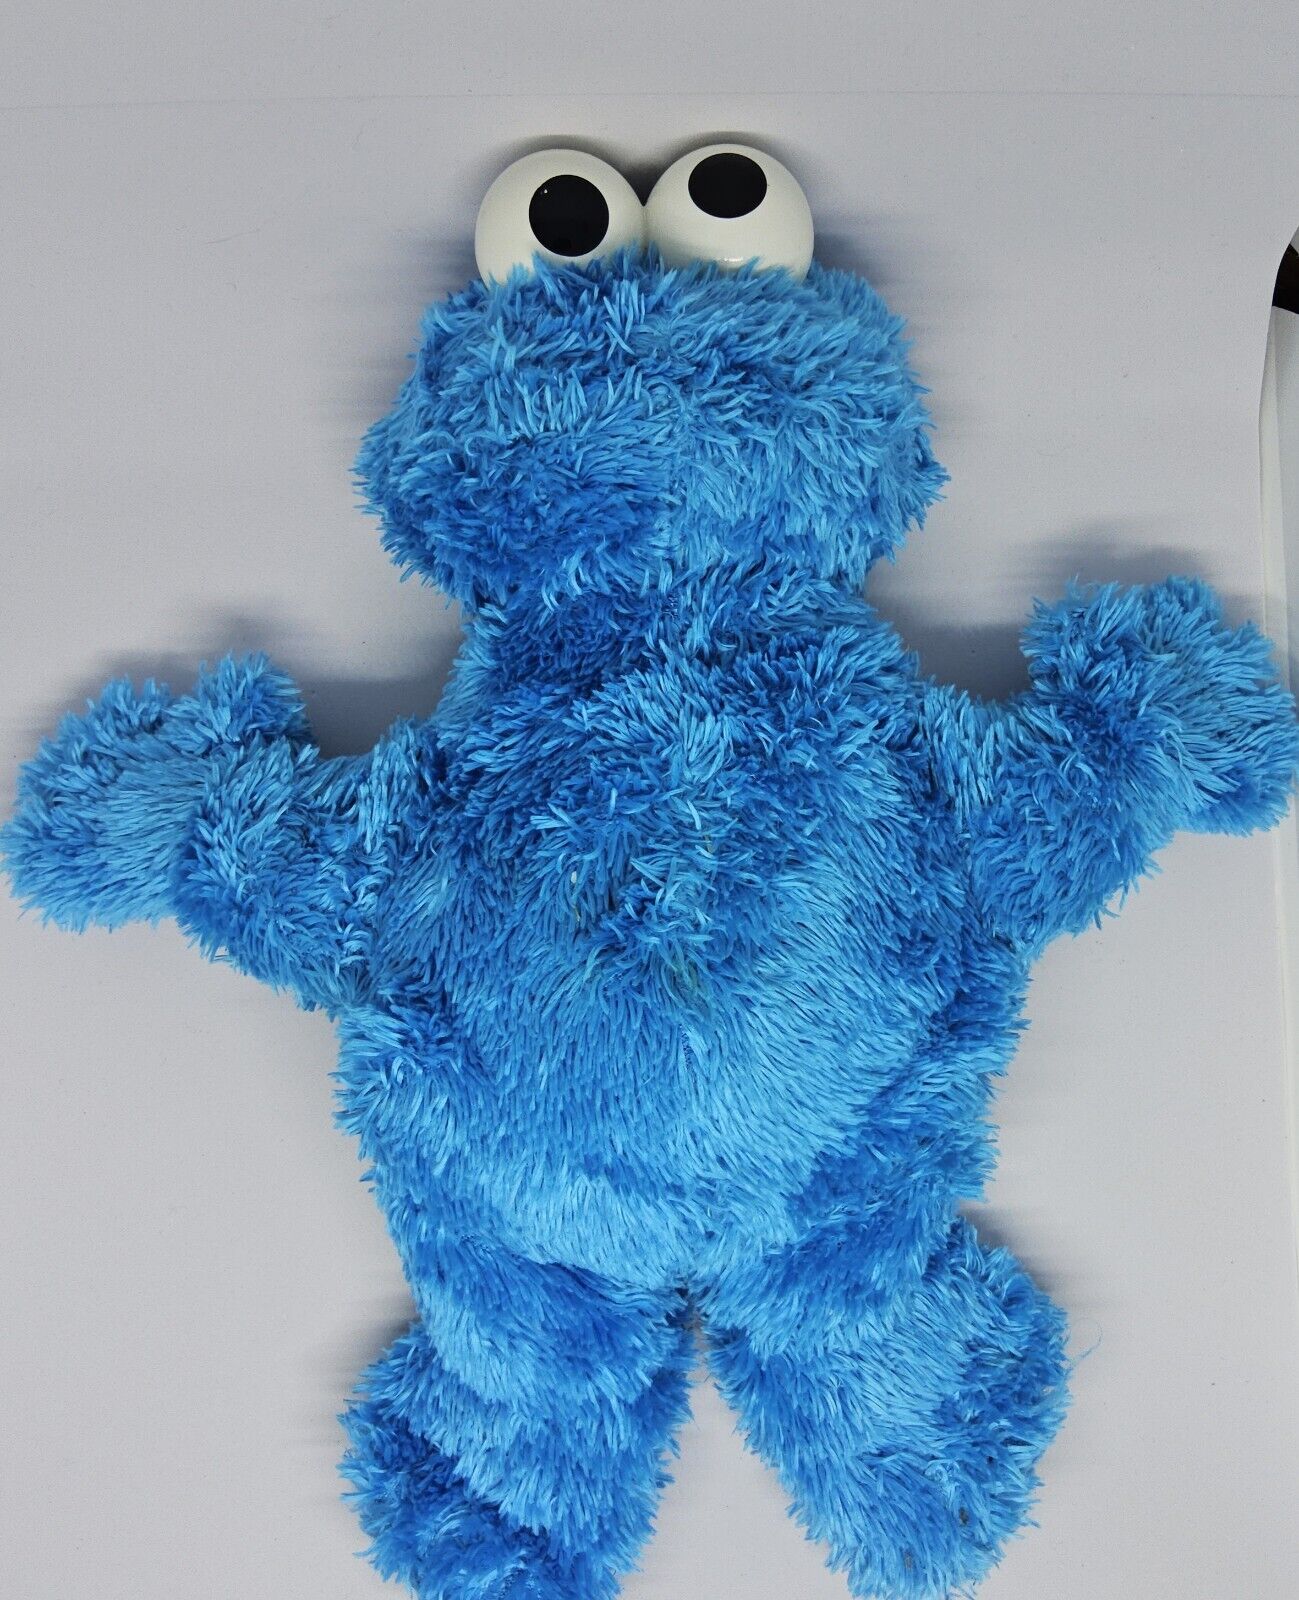 SQUEEZE-A-SONG COOKIE MONSTER Talking Singing Plush Sesame Street 11\